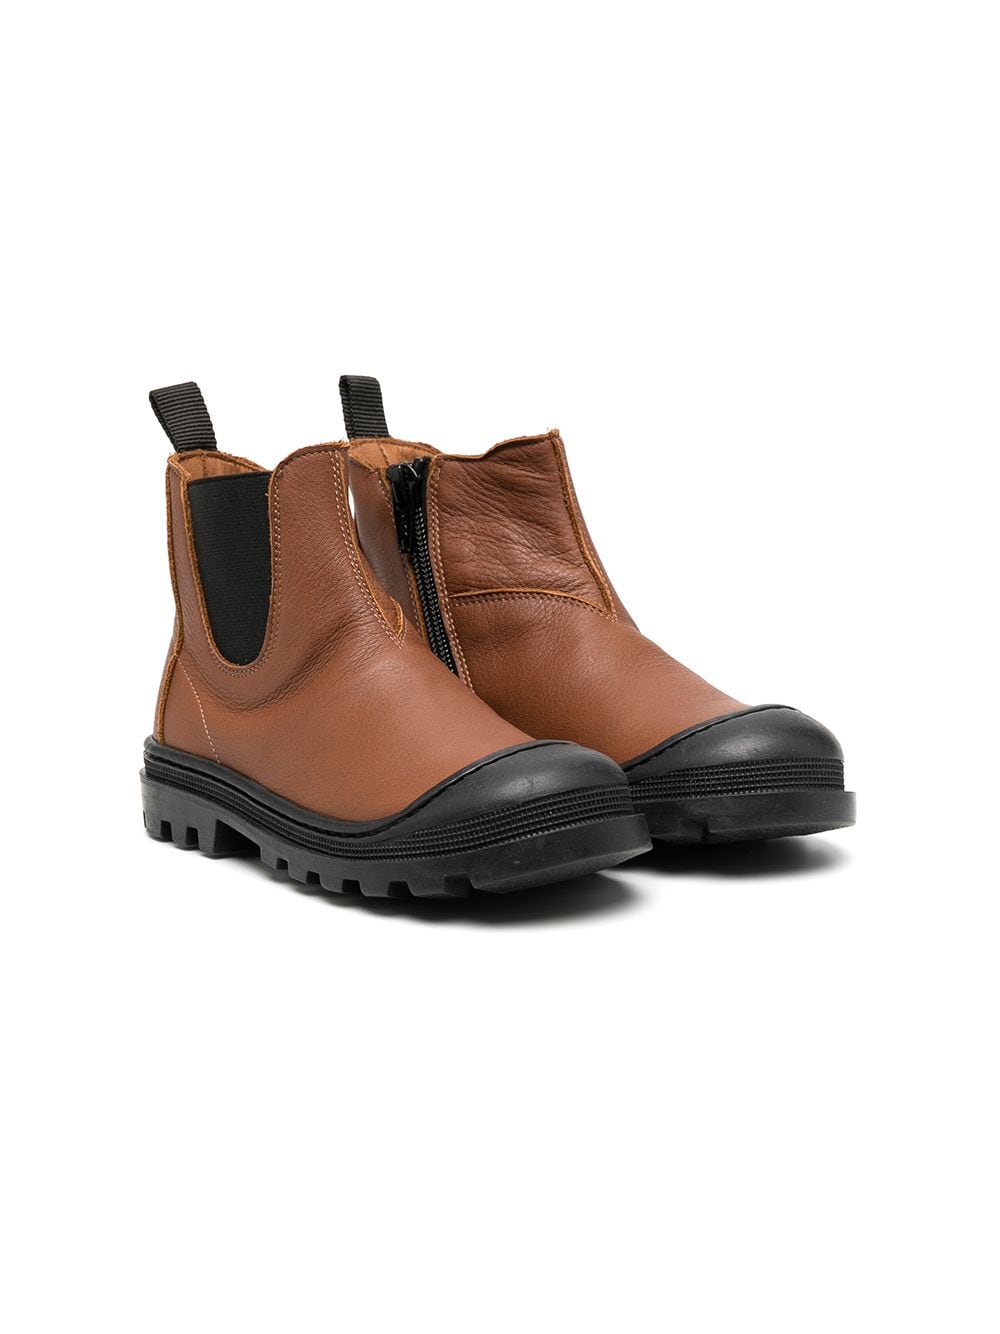 Boys & Girls Brown Leather Boots